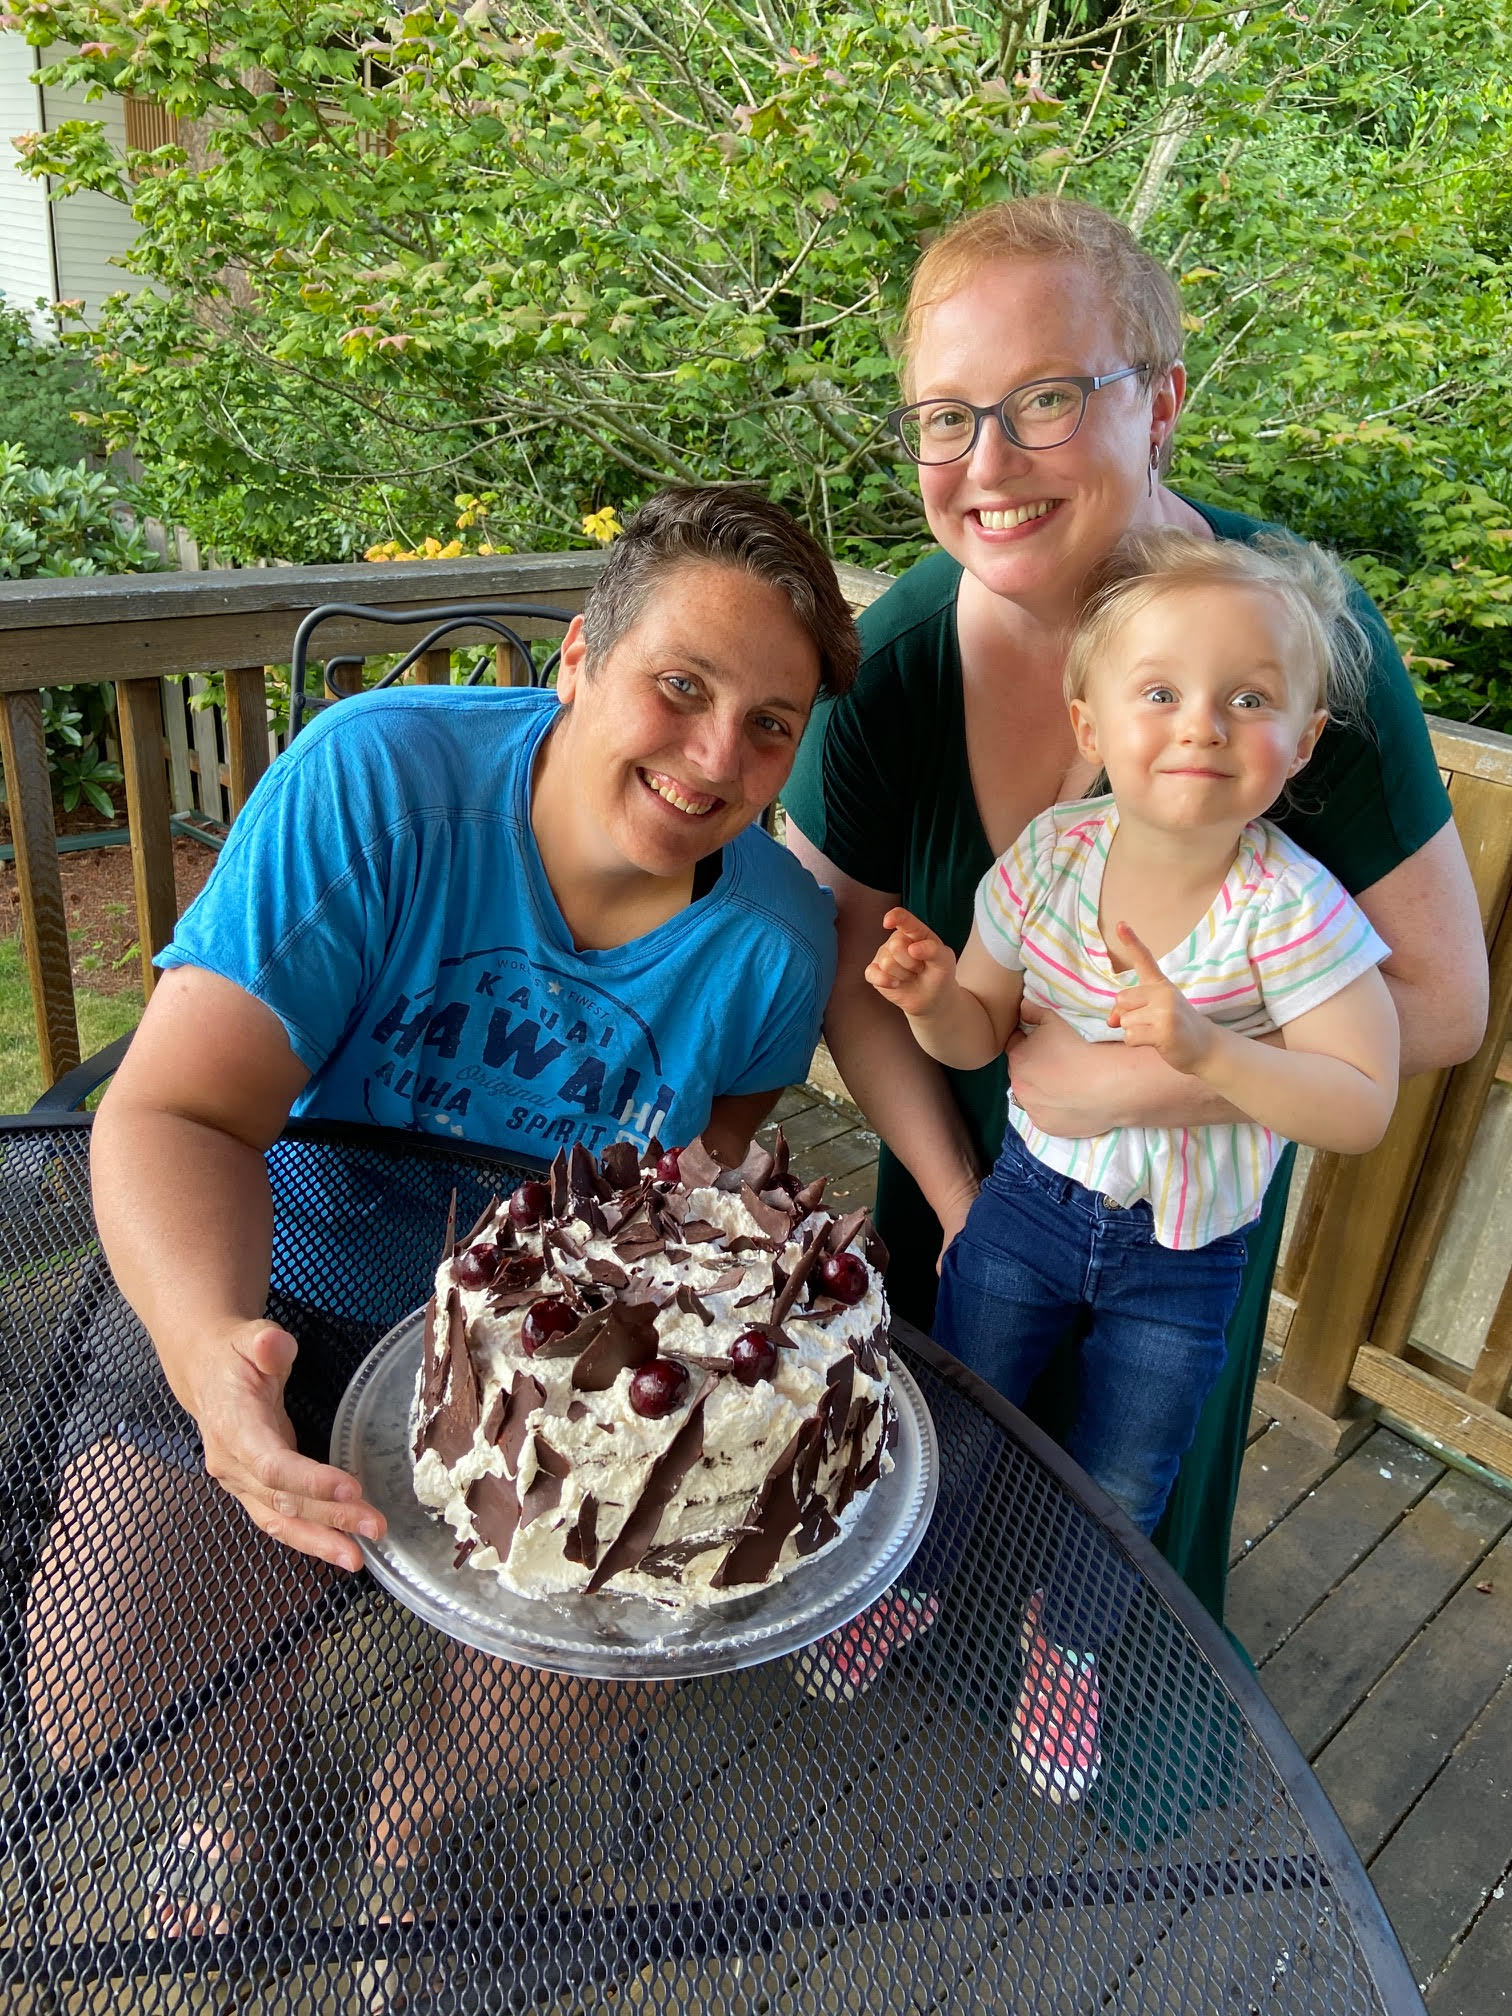 Satterfield, left, with wife Heather Dooley and daughter Rowan on June 23, 2020